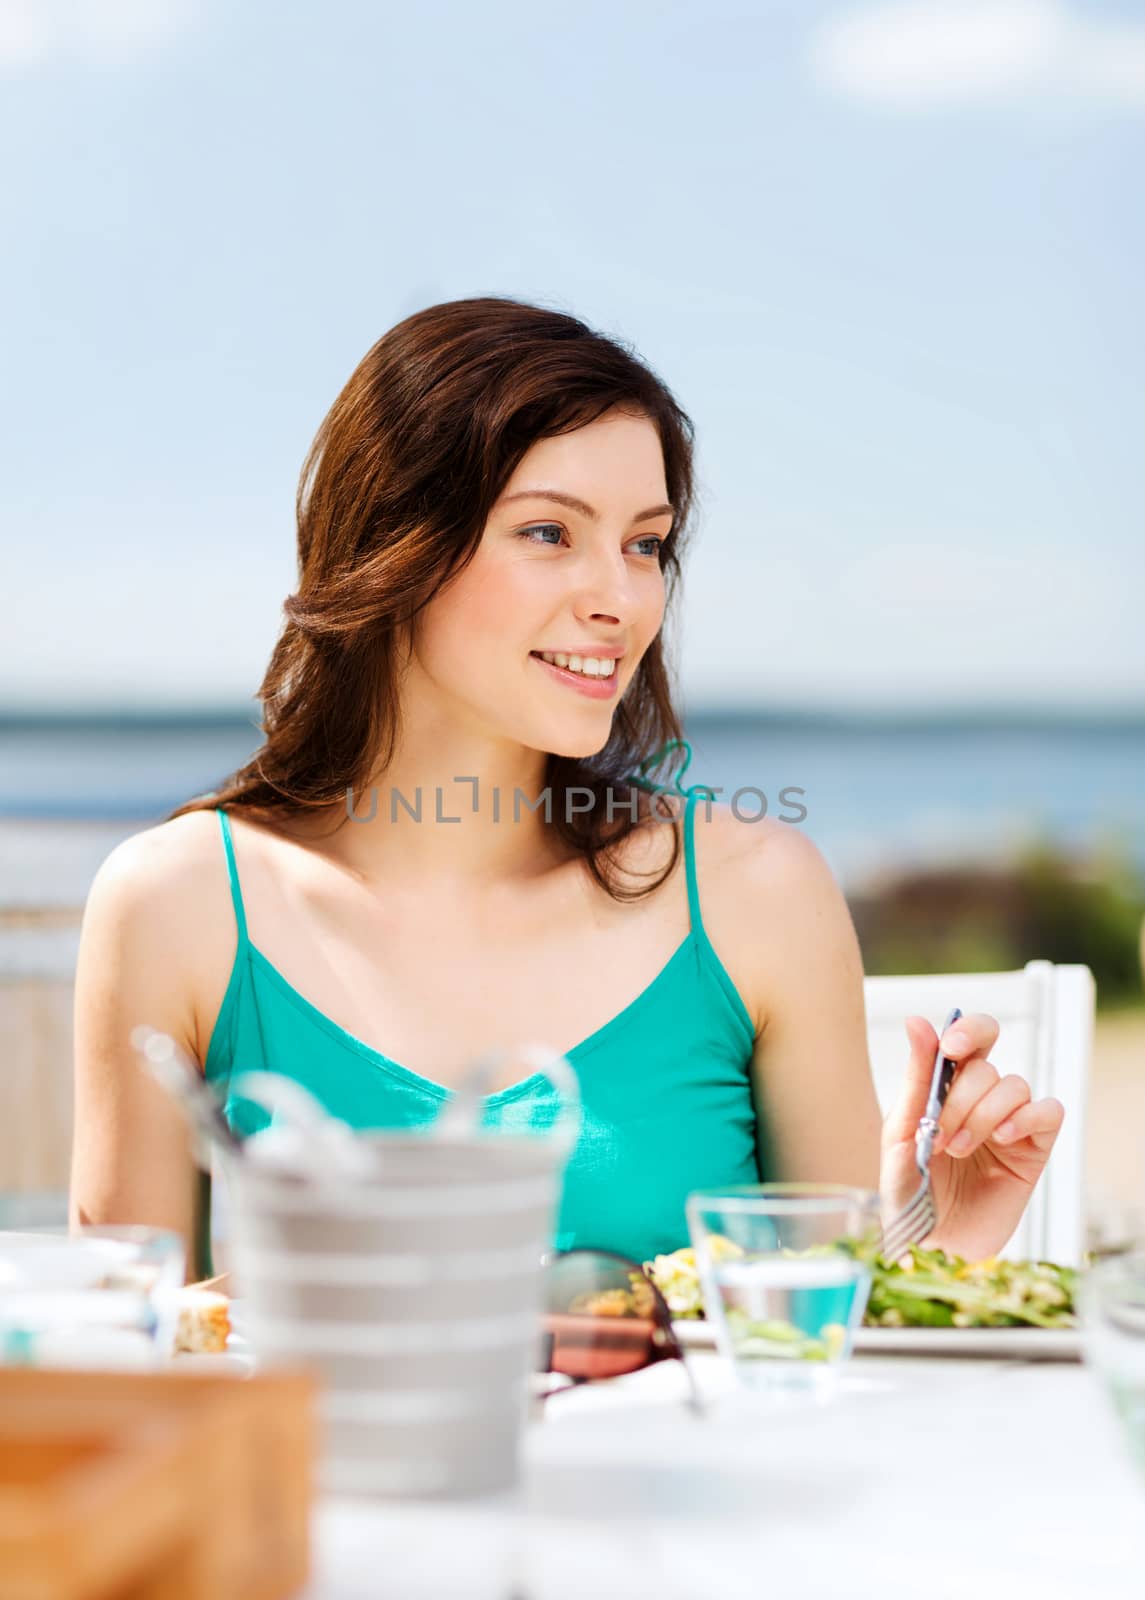 girl eating in cafe on the beach by dolgachov